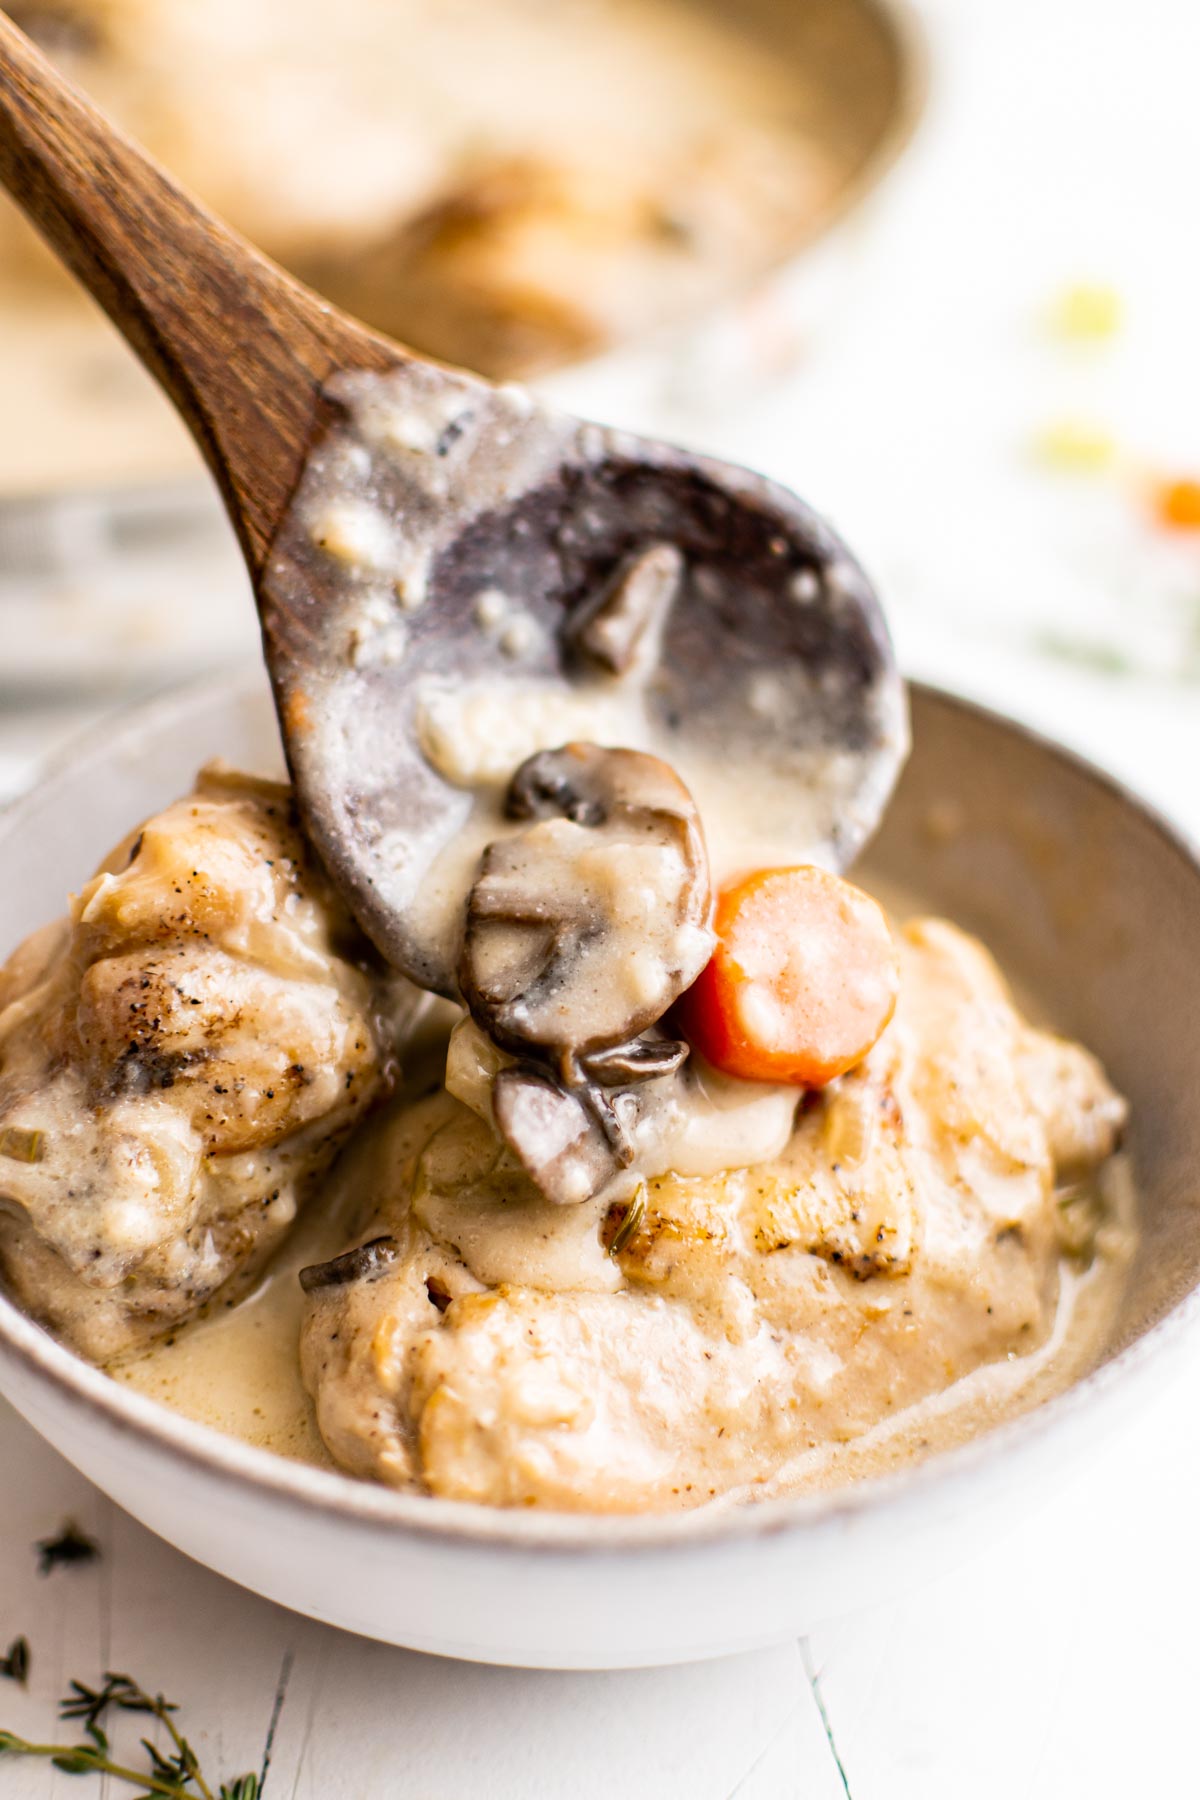 close up view of a wooden spoon scooping a portion of chicken fricassee into a bowl